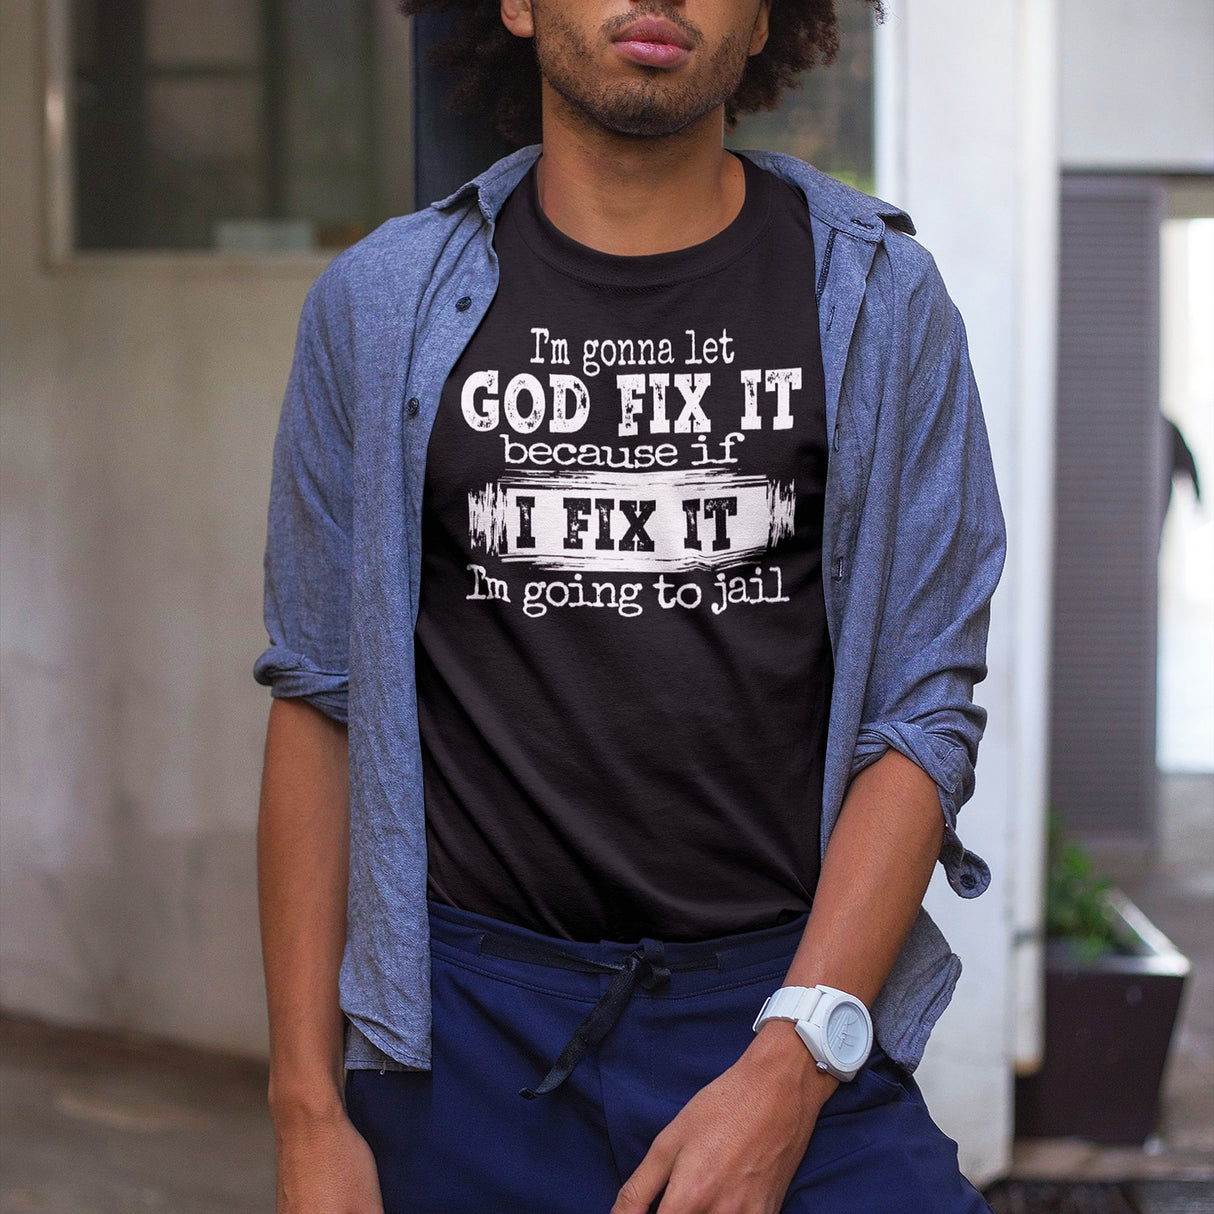 im-gonna-let-god-fix-it-because-if-i-fix-it-im-going-to-jail-faith-tee-faith-t-shirt-trust-tee-surrender-t-shirt-belief-tee#color_black